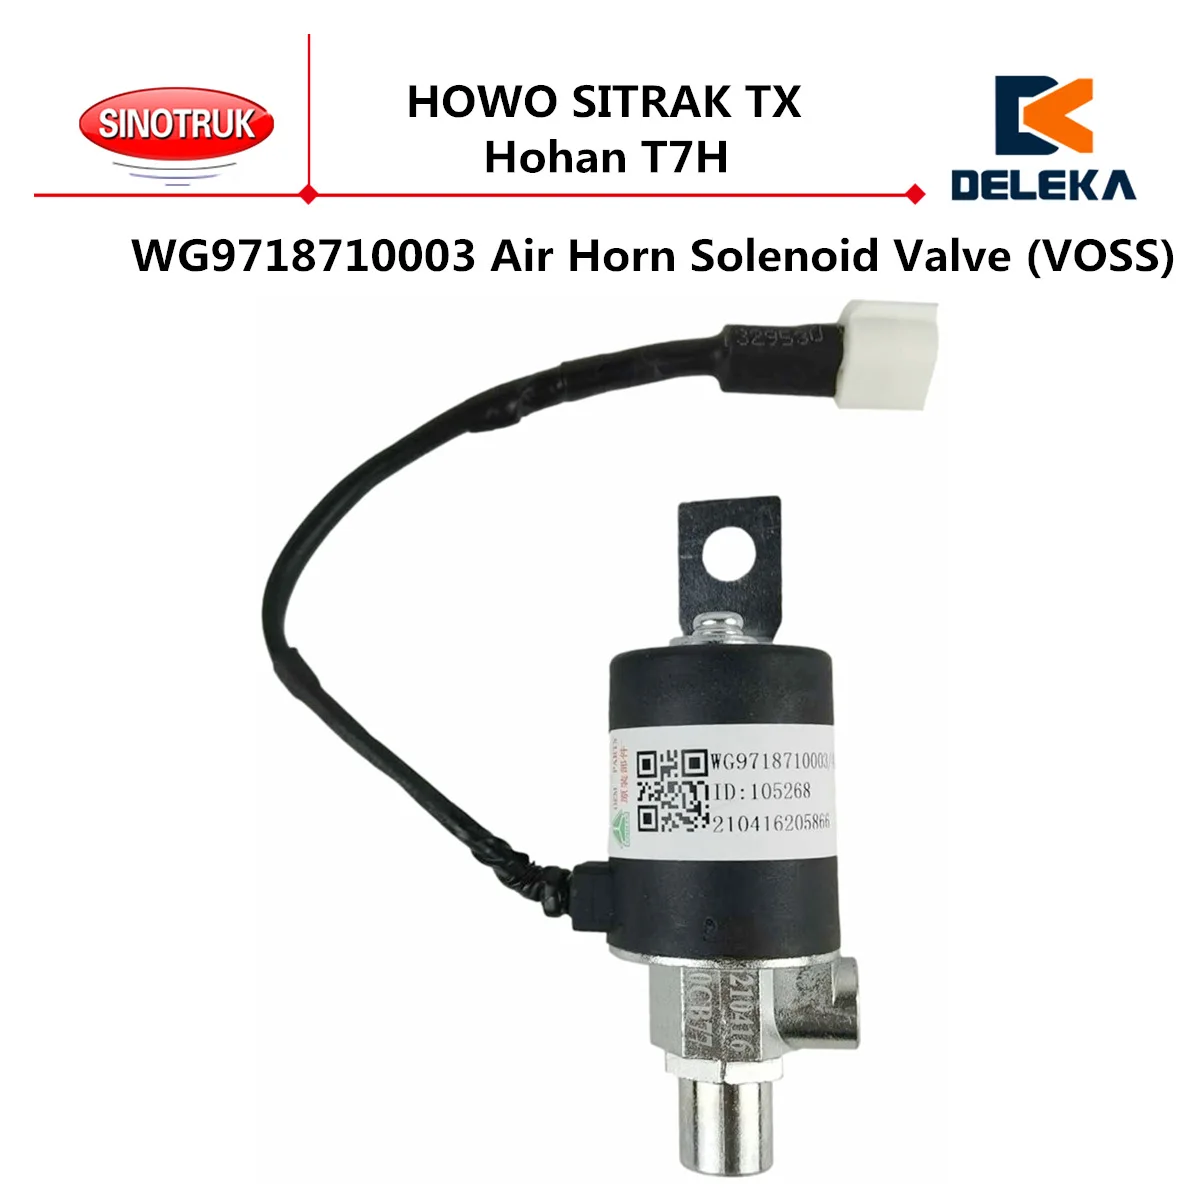 WG9718710003 Air Horn Solenoid Valve (VOSS) Used For CNHTC SINOTRUK HOWO SITRAK Original Spare Parts TX Hohan T7H